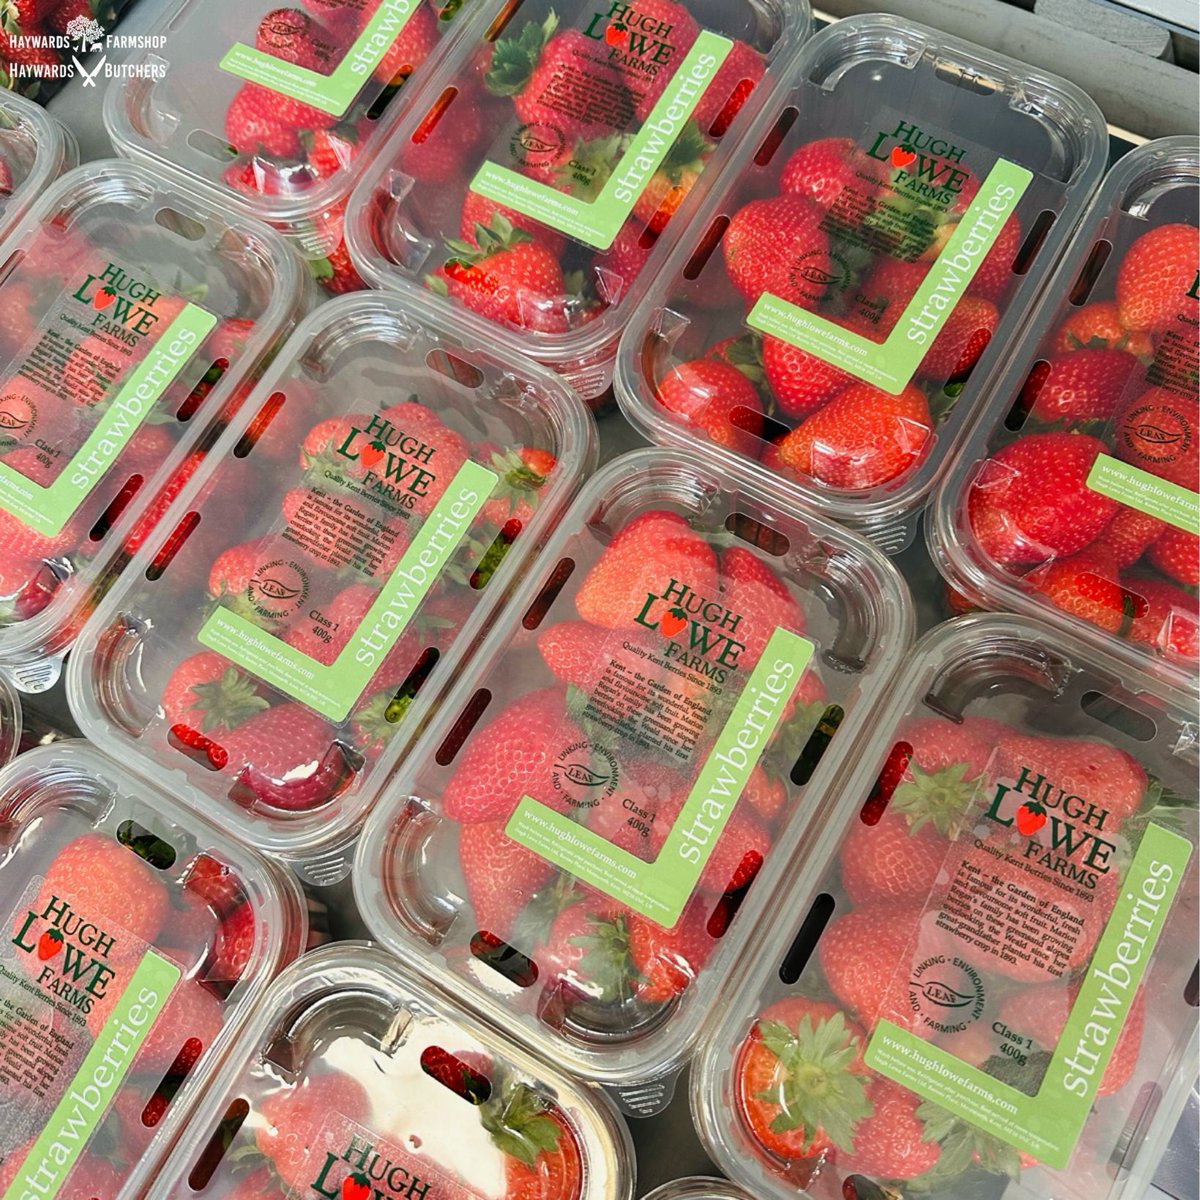 🍓Taste the sweetness with our locally sourced strawberries, harvested less than a mile away from our farmshop! Grown with care & bursting with flavour, these juicy delights are a true seasonal treat! #LocalStrawberries #FarmFresh #SupportLocal #Farmshop #Tonbridge #Haywards1990